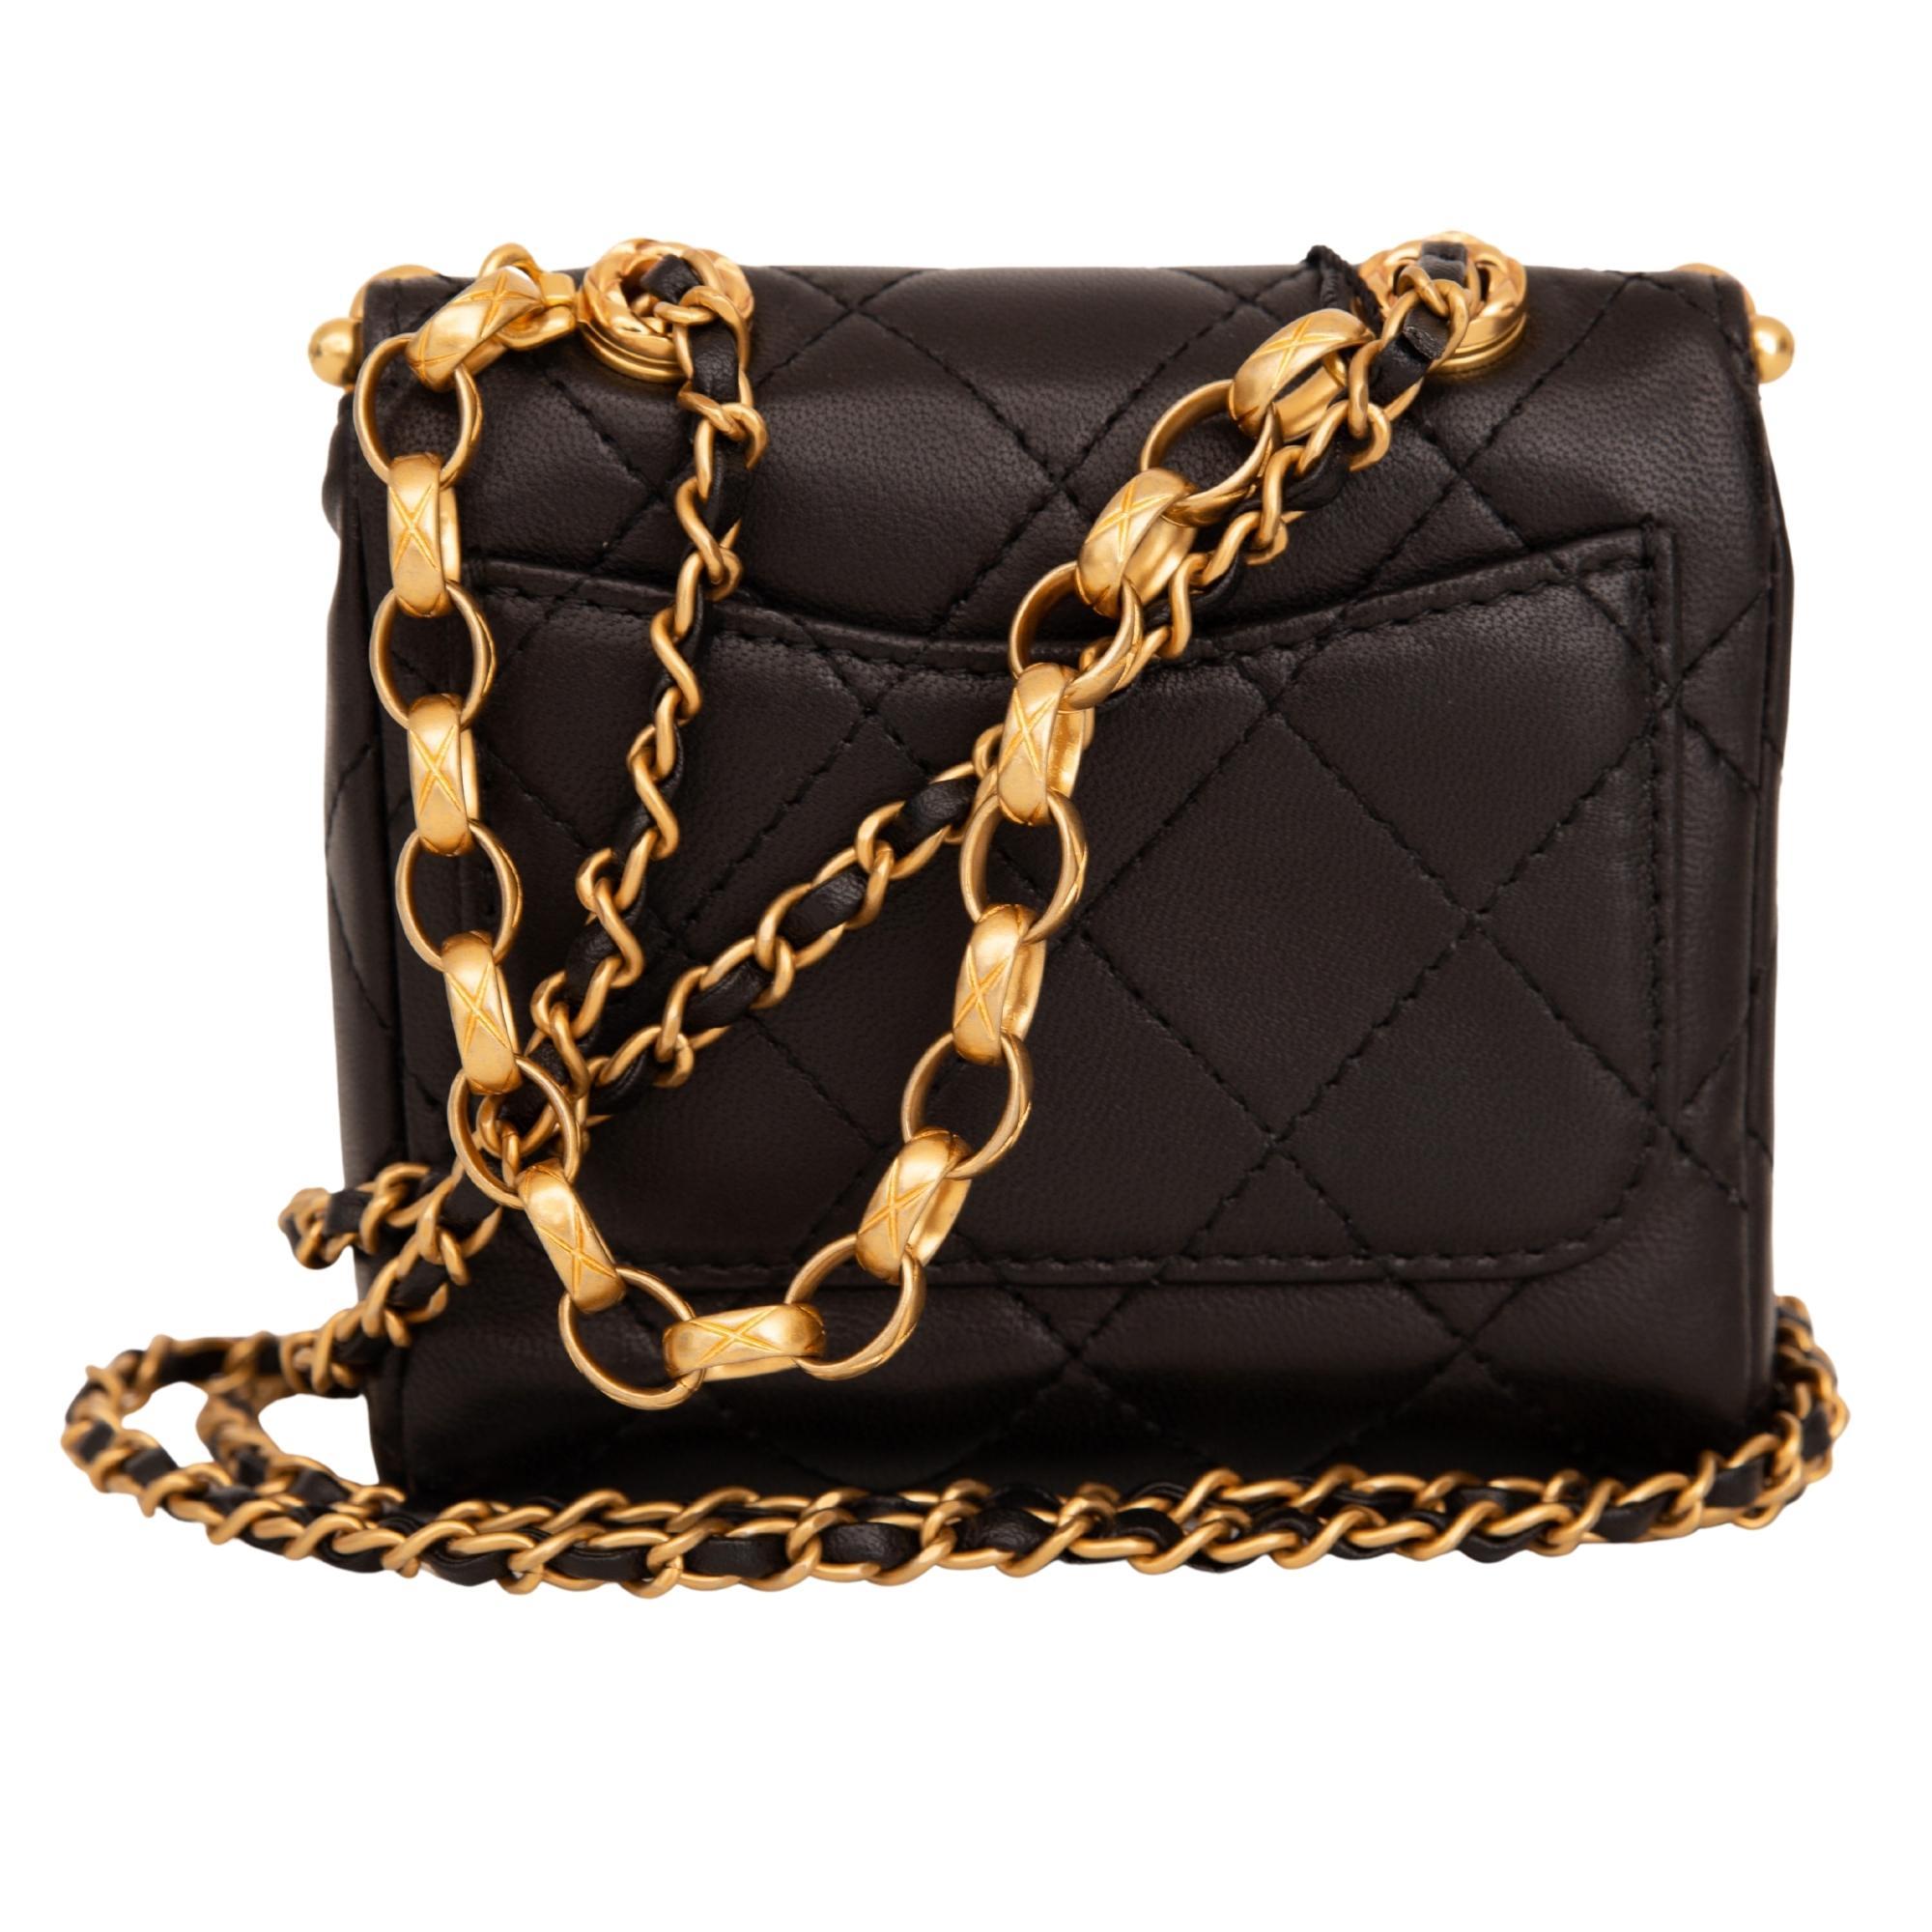 Chanel mini bag made of lambskin leather and features gold tone hardware, kiss lock closure, a gold tone chain interlaced with leather shoulder strap, a decorative gold tone chain at front and beige leather interior lining. Chanel bags with the